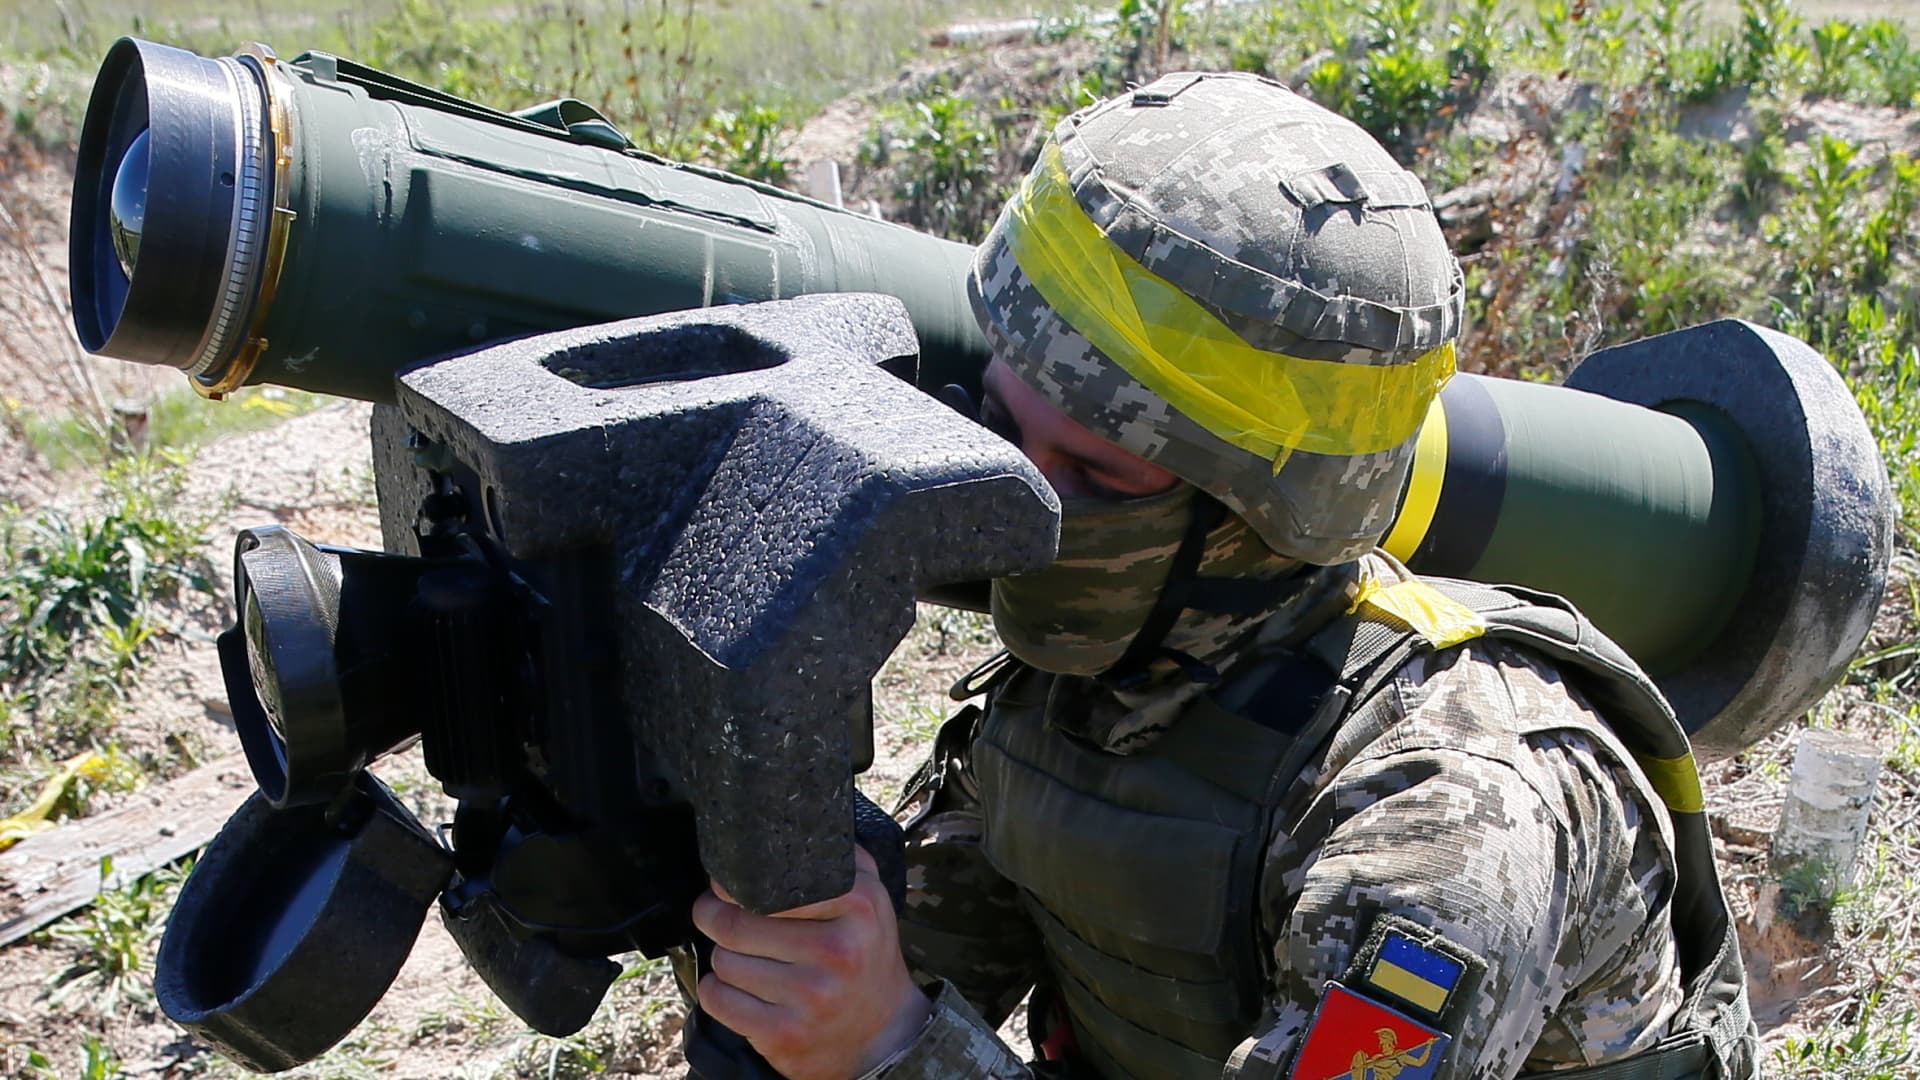 A soldier holds a Javelin missile system during a military exercise in the training centre of Ukrainian Ground Forces near Rivne, Ukraine May 26, 2021. Picture taken May 26, 2021. 